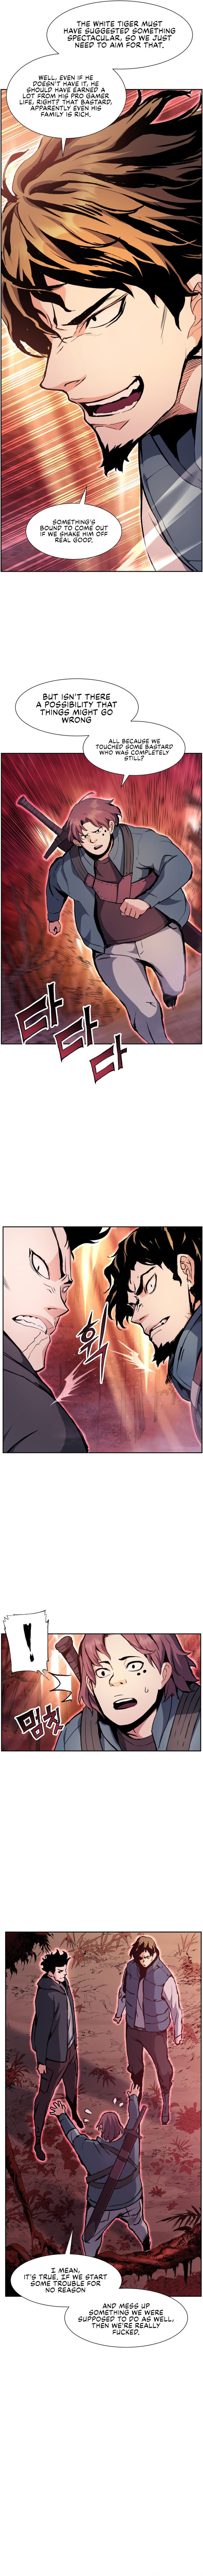 return-of-the-shattered-constellation-chap-35-2